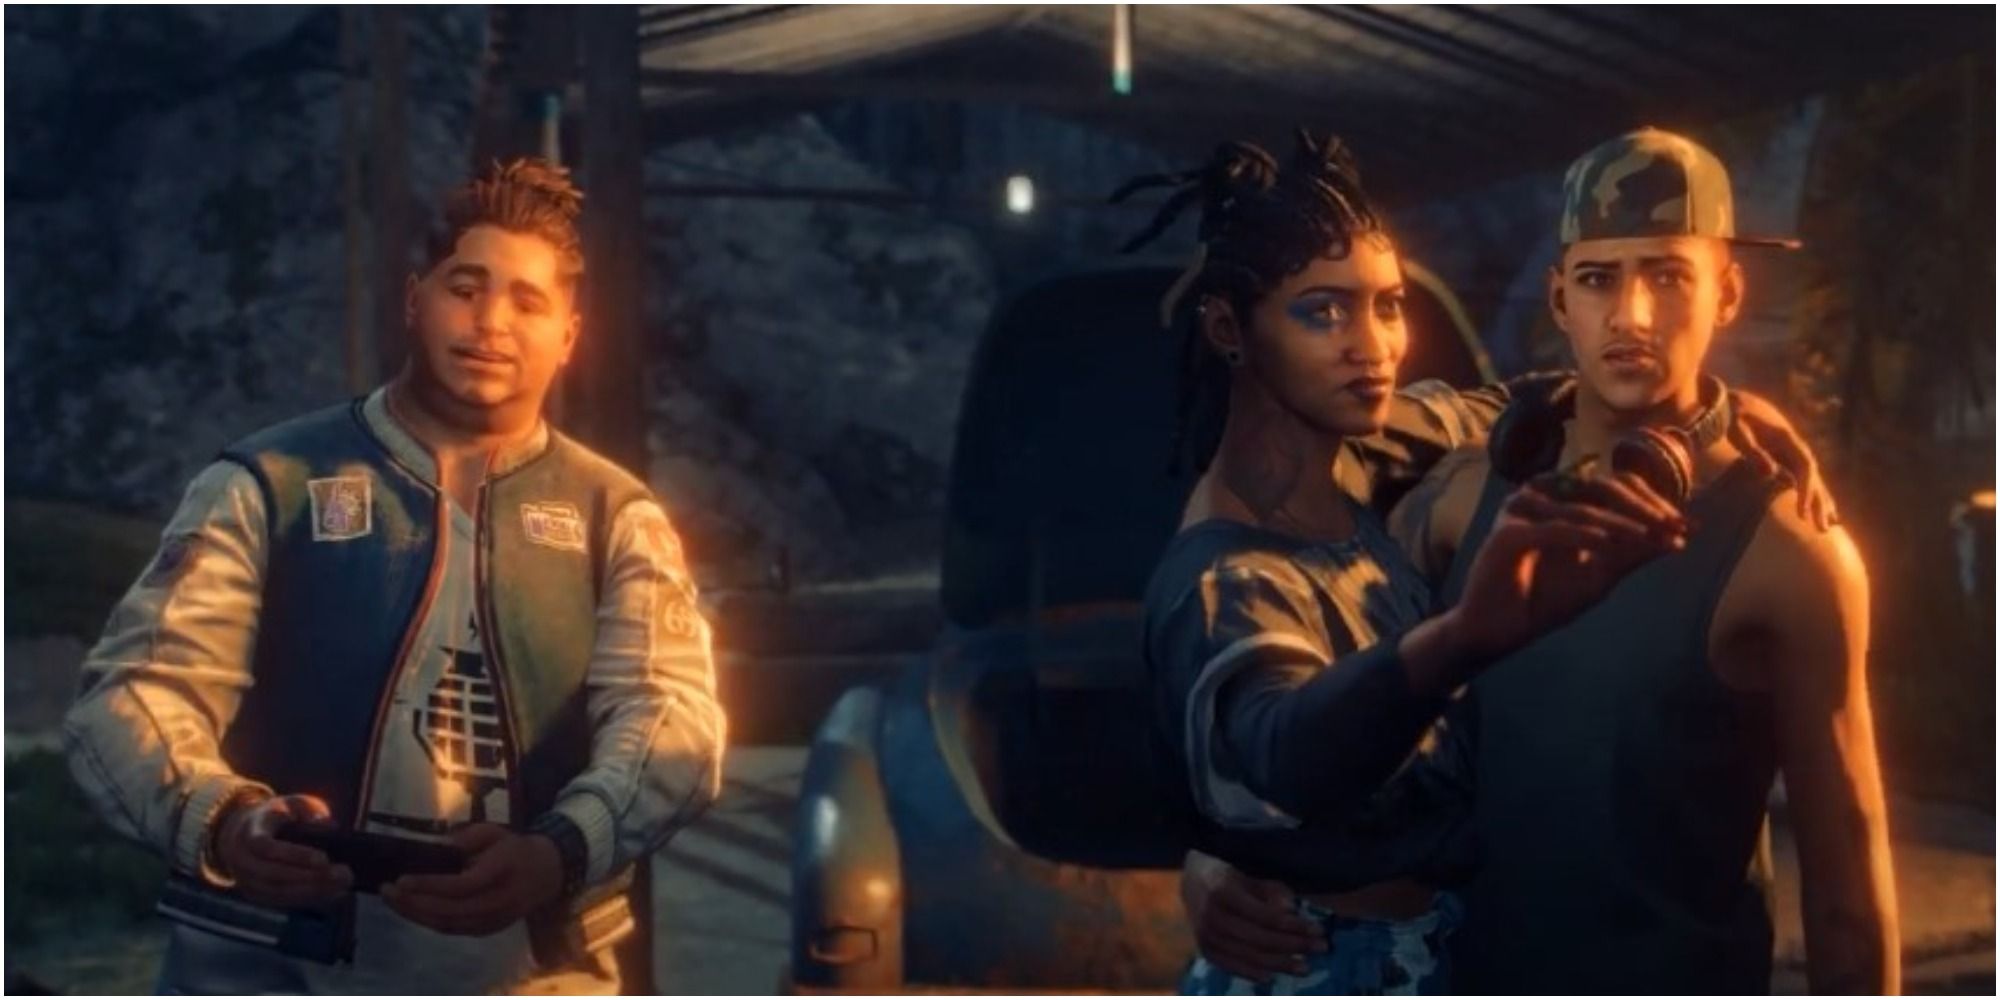 Far Cry 6 Bicho, Talia, And Paolo Reunite After The Attack On Their Encampment